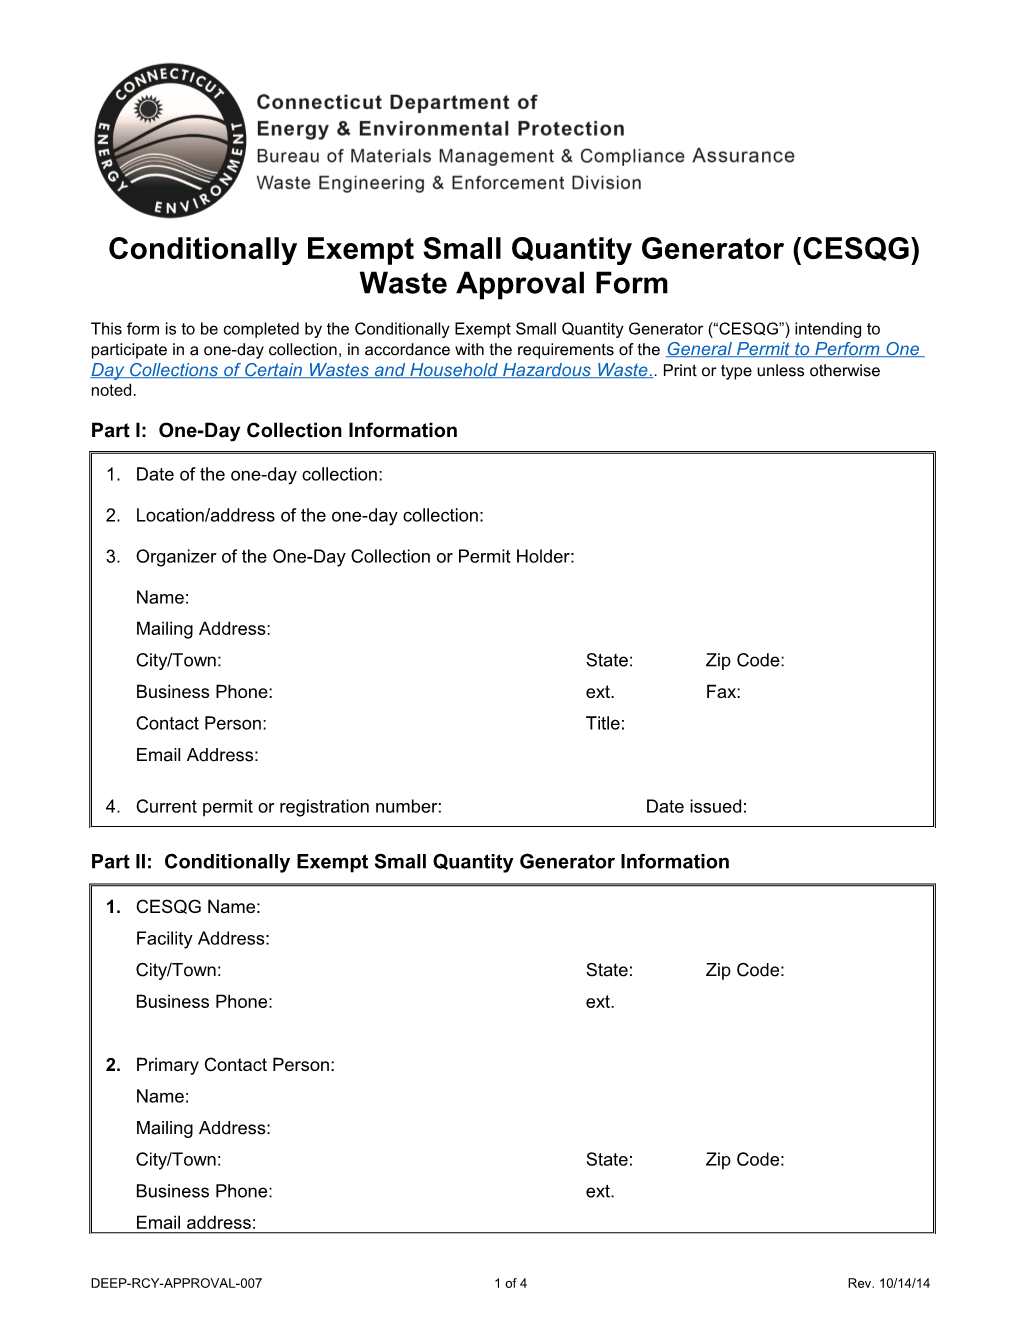 Conditionally Exempt Small Quantity Generator (CESQG) Waste Approval Form: Household Hazardous